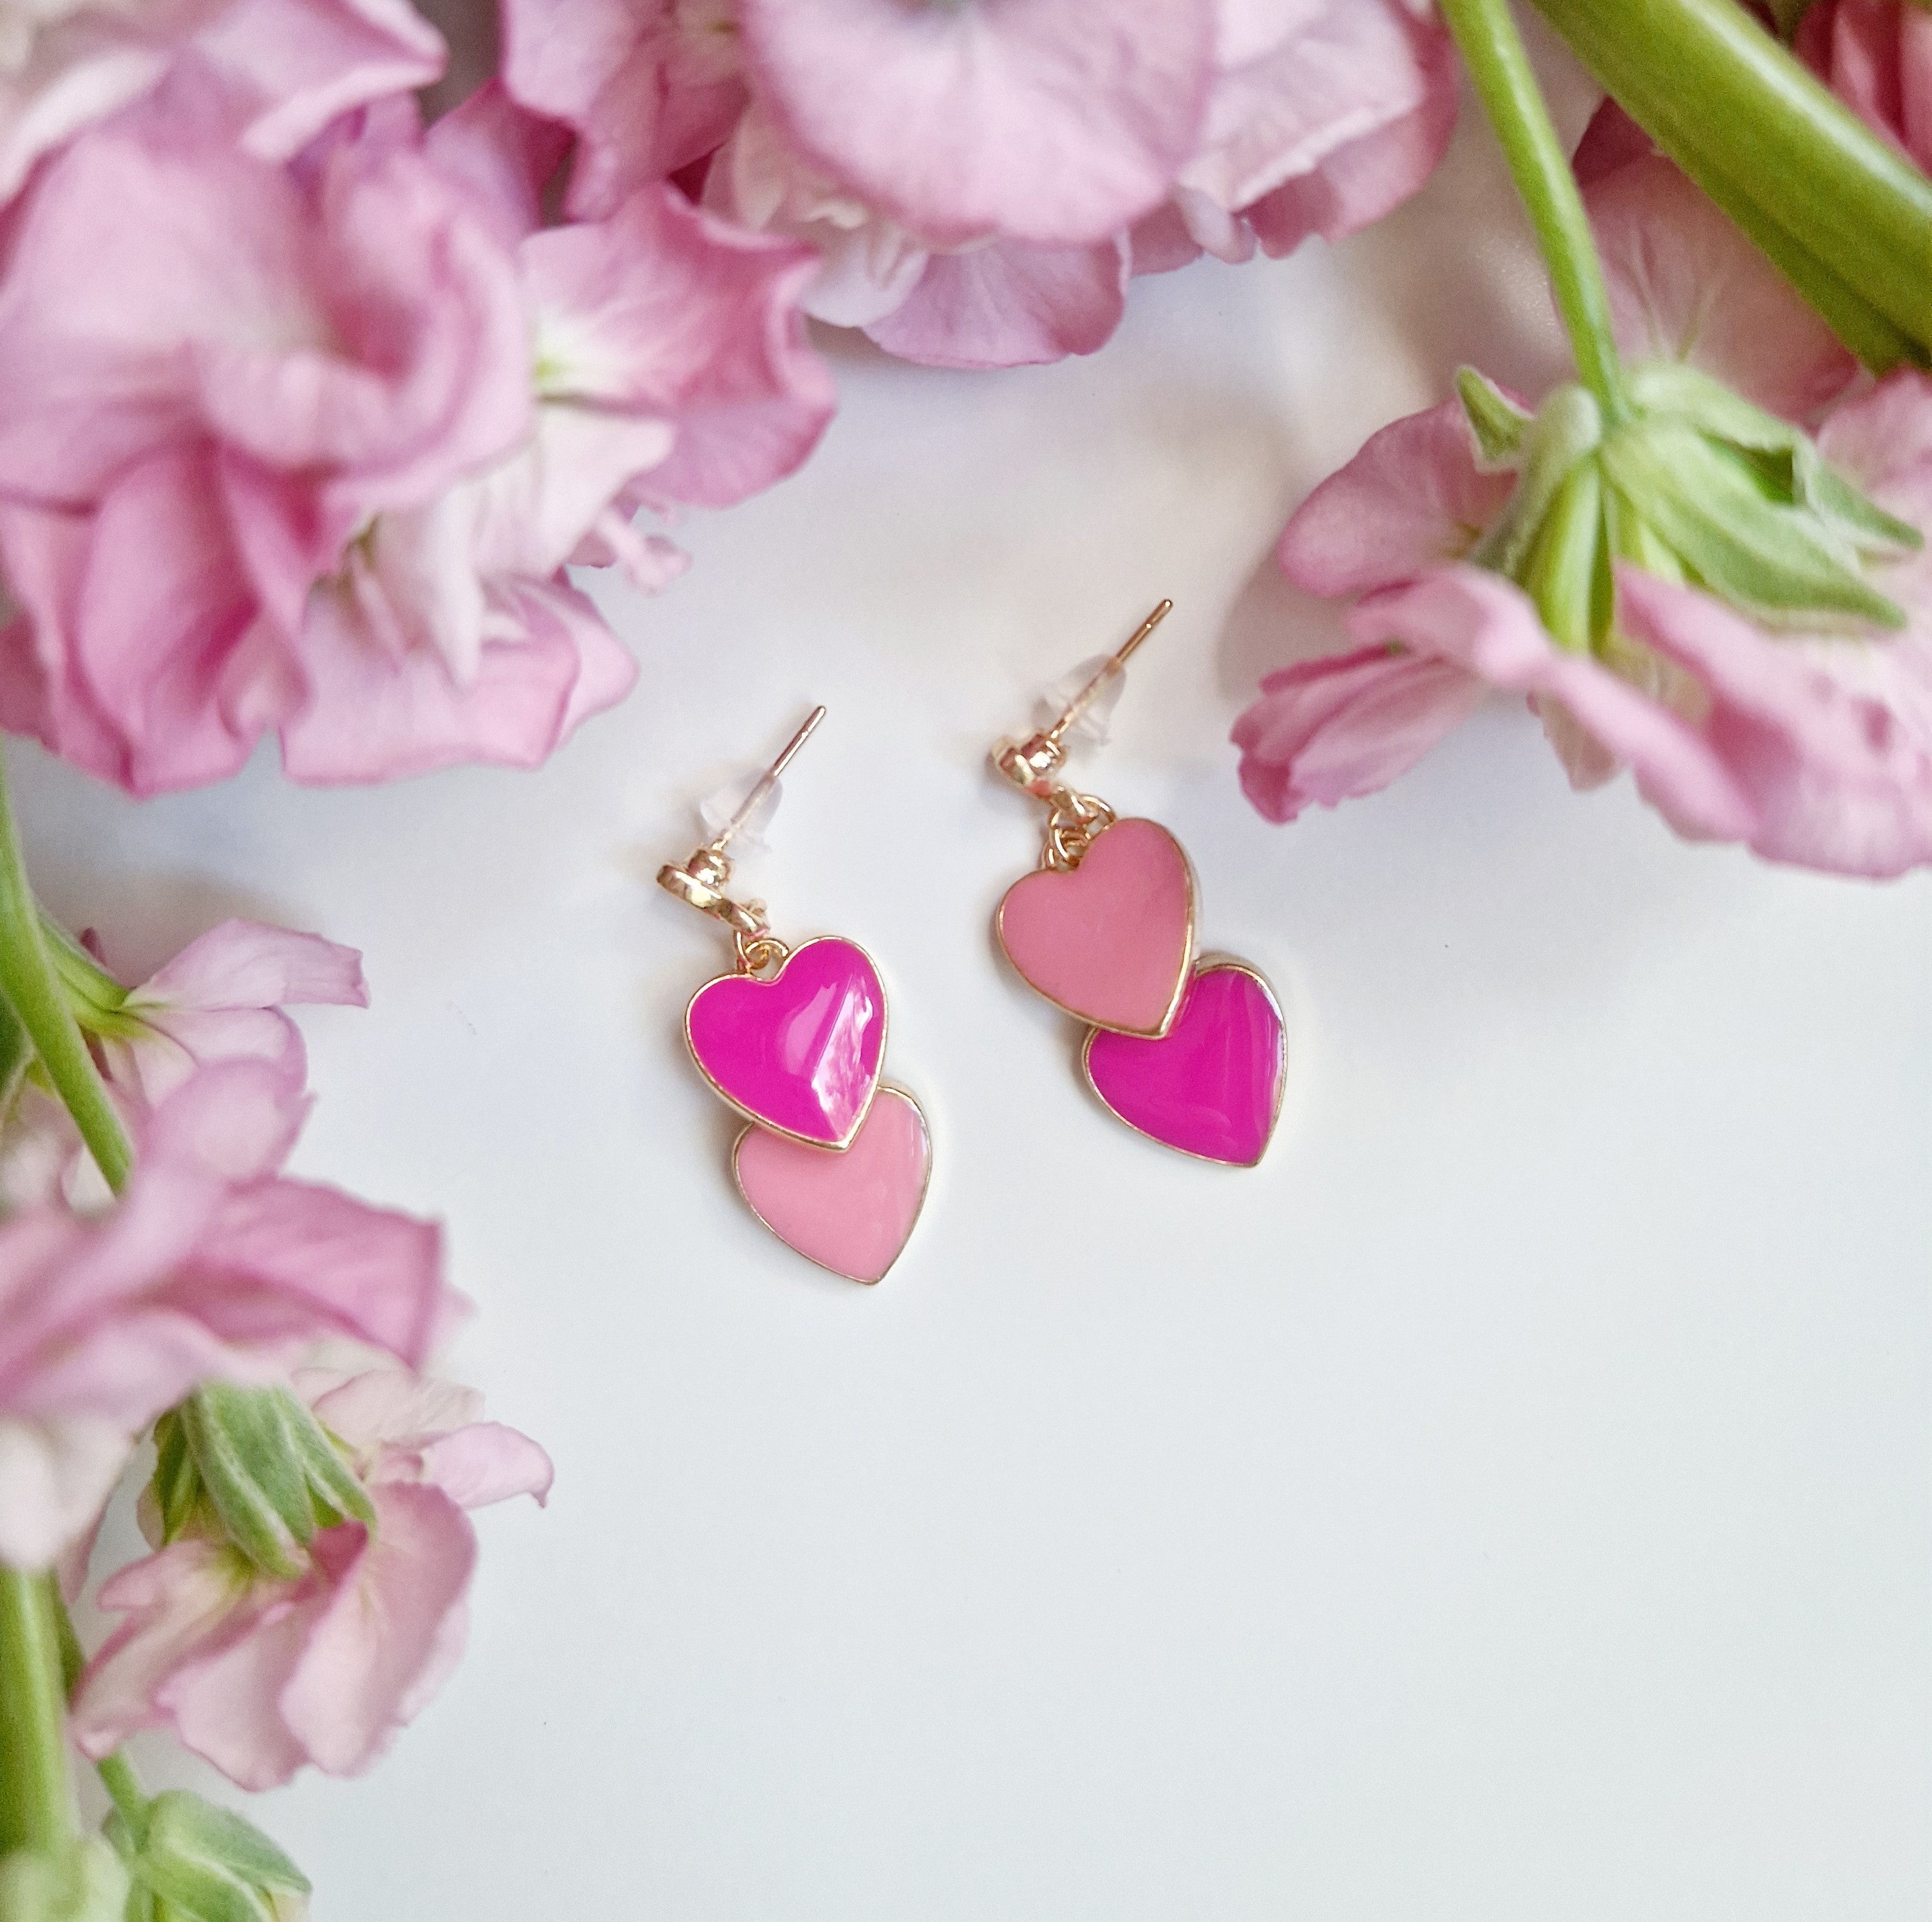 double heart earrings with 2 shades of pink